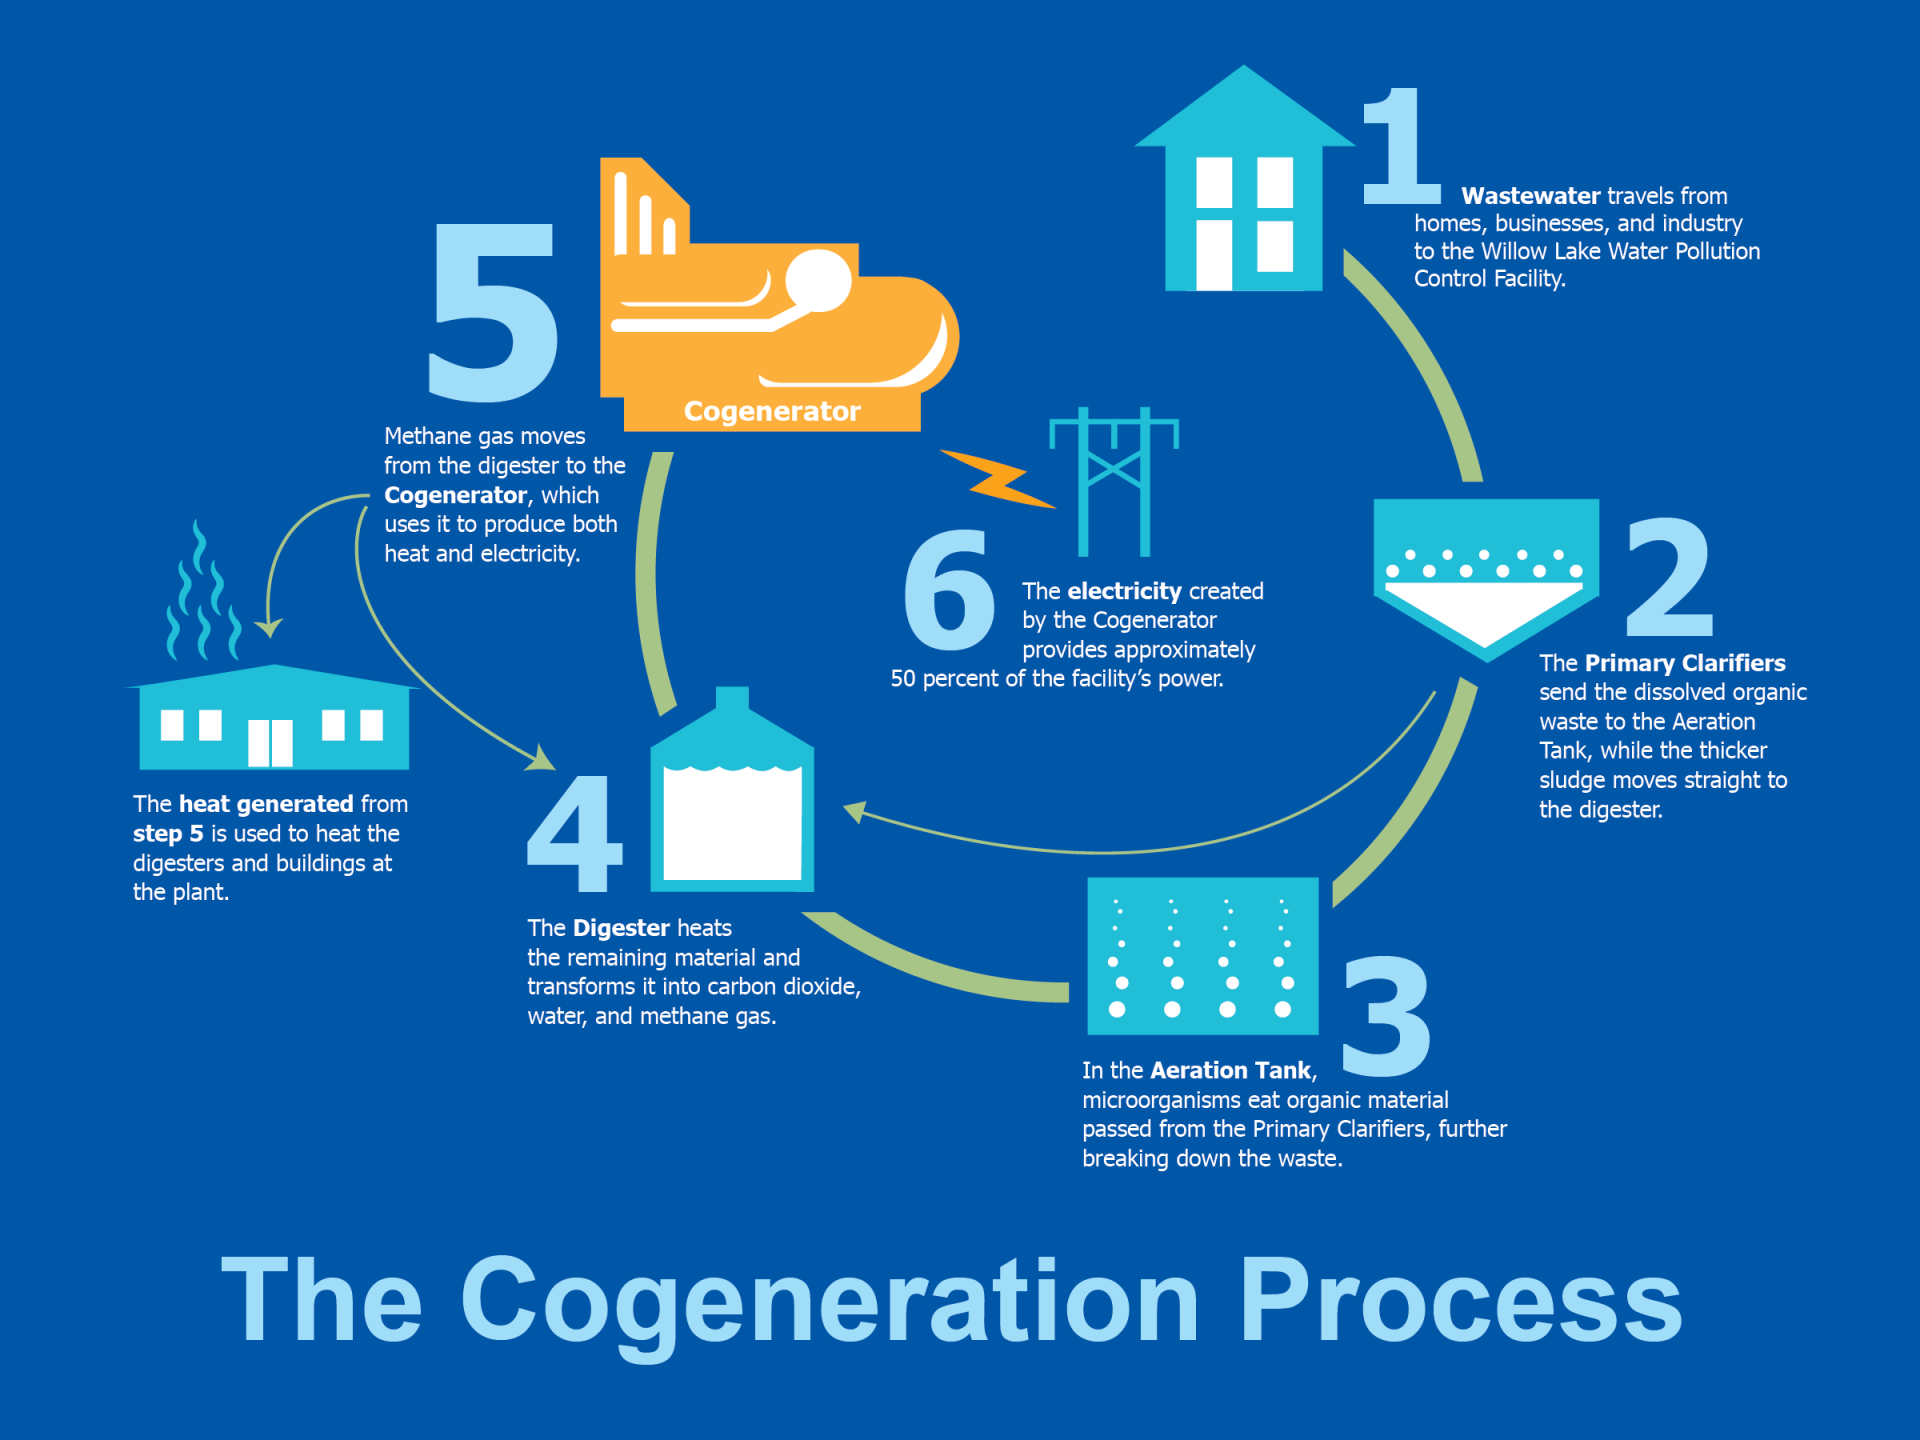 The Cogeneration Process: How methane is produced